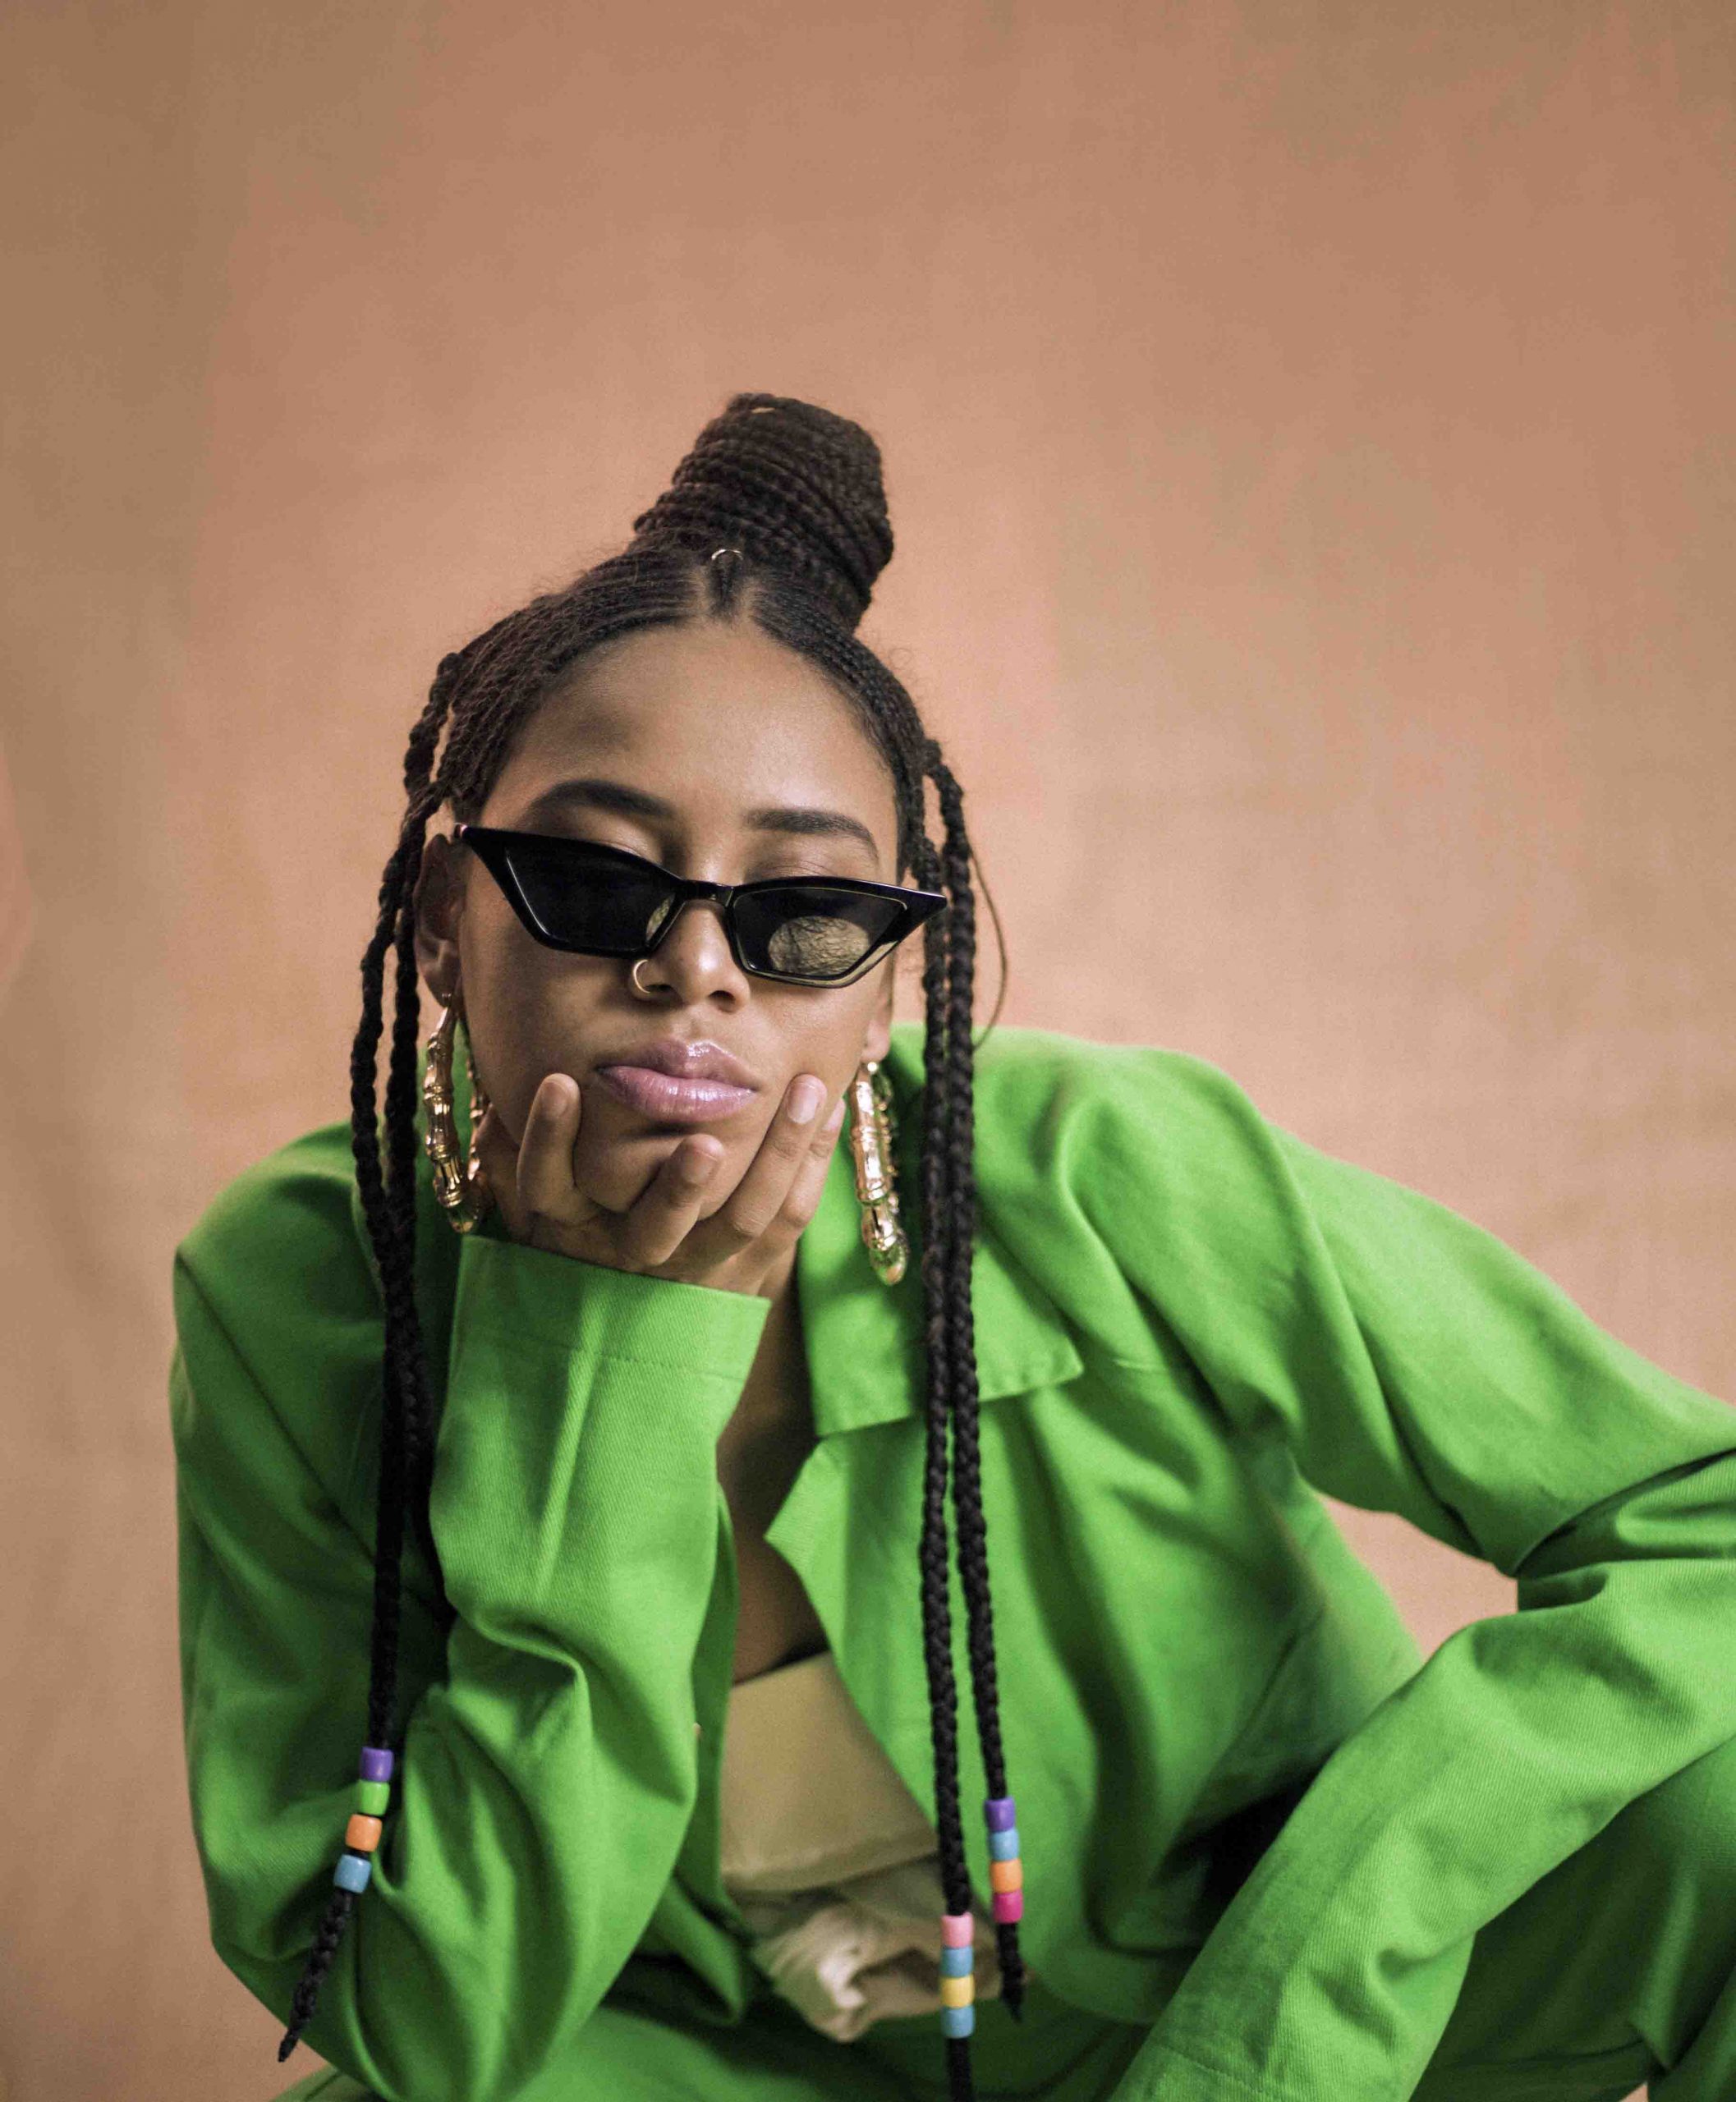 Sho Madjozi and Moonchild Sanelly to perform at BudX in Miami